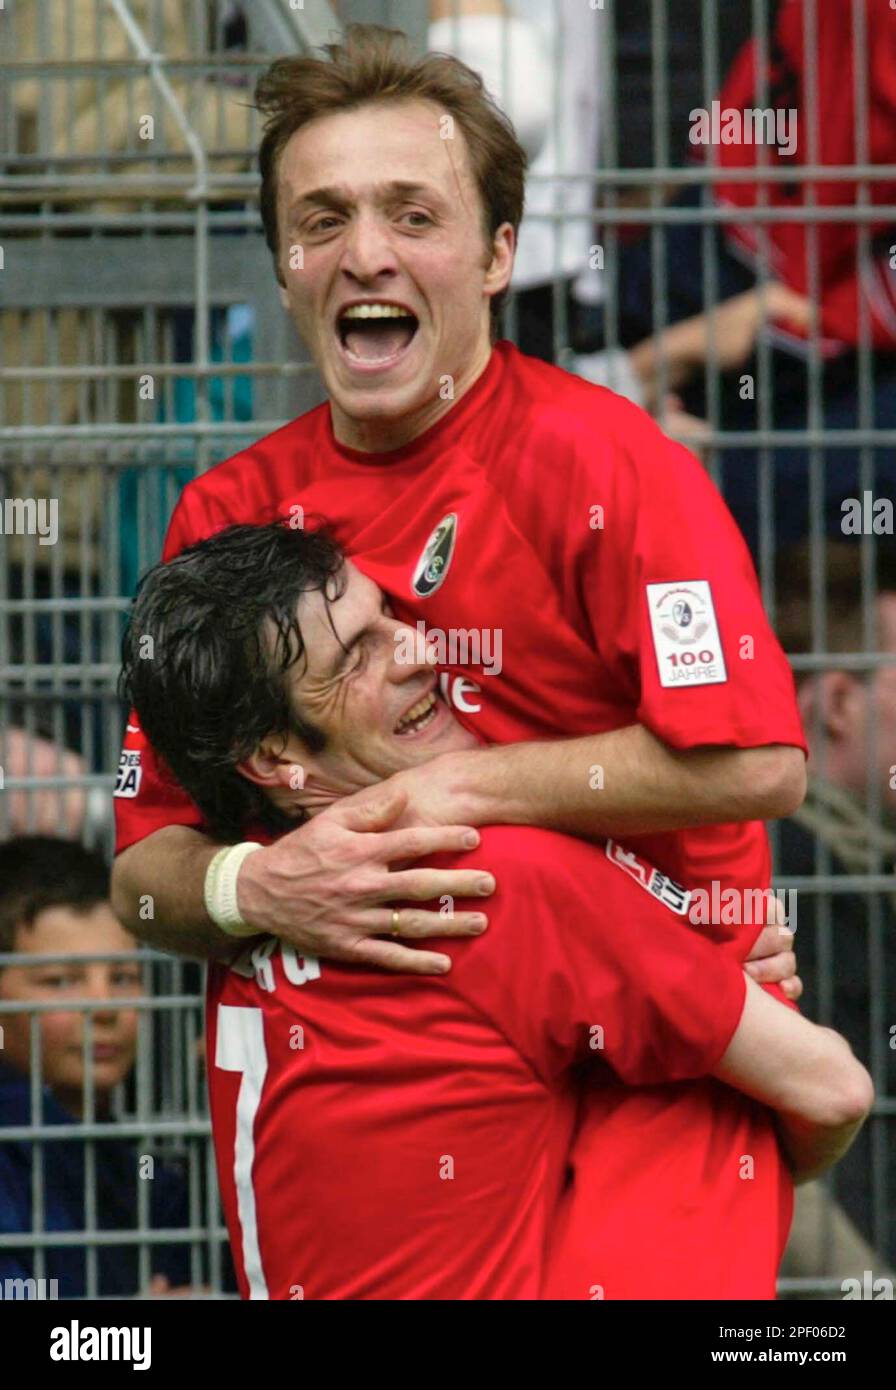 Freiburg's Georgian player Alexander Iashvili celebrates with his teammate  Levan Tsikitishvili from Georgia after scoring during the German first  division soccer match between SC Freiburg and Hannover 96 at Freiburg's  Dreisam stadium,